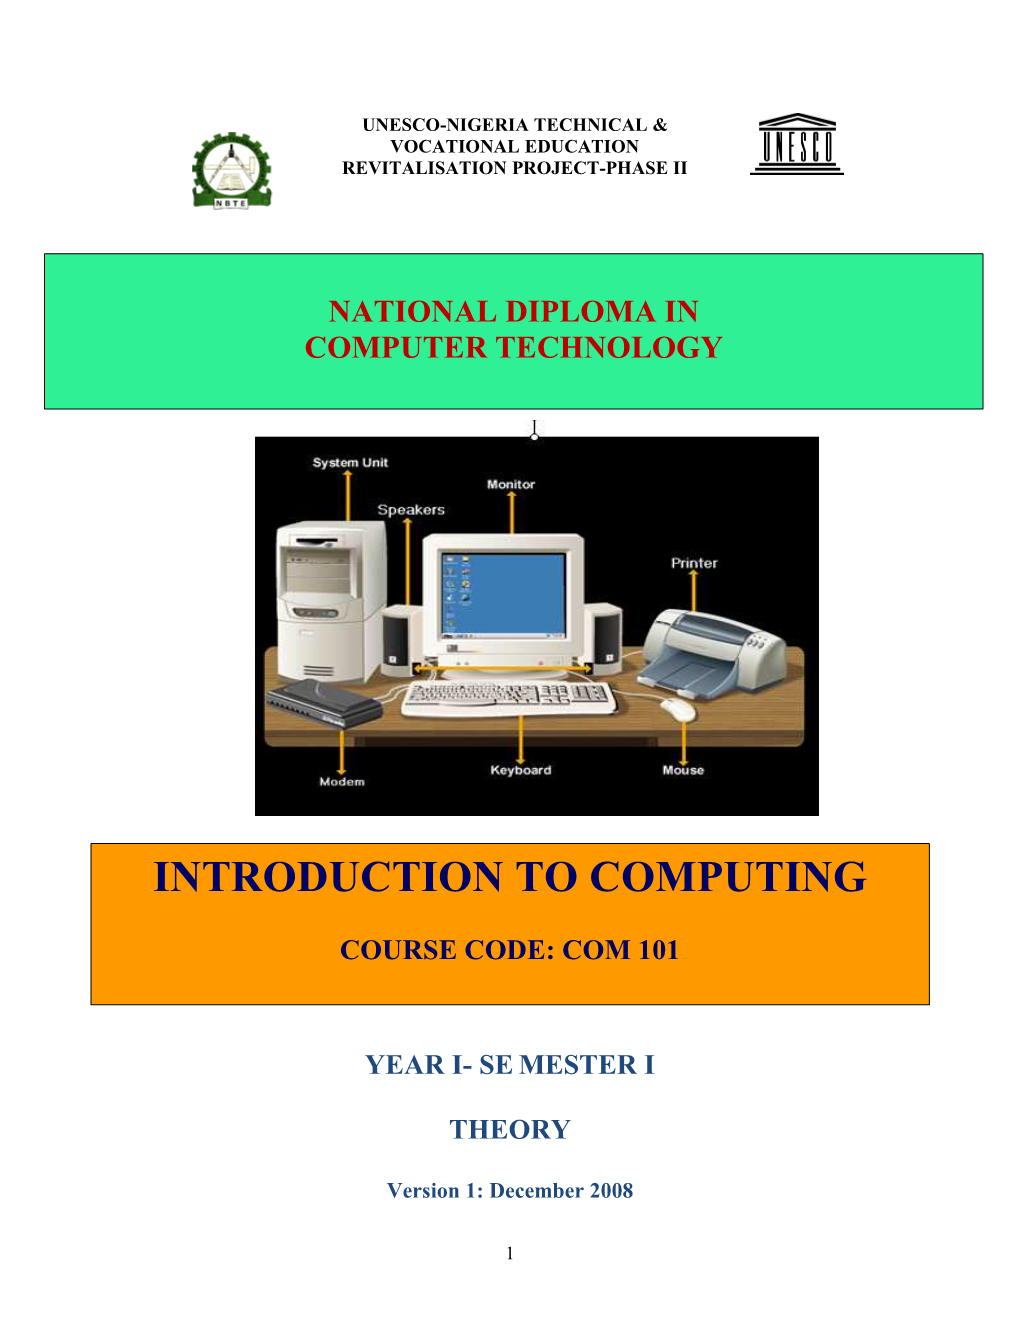 COM 101 Introduction to Computing Theory Book